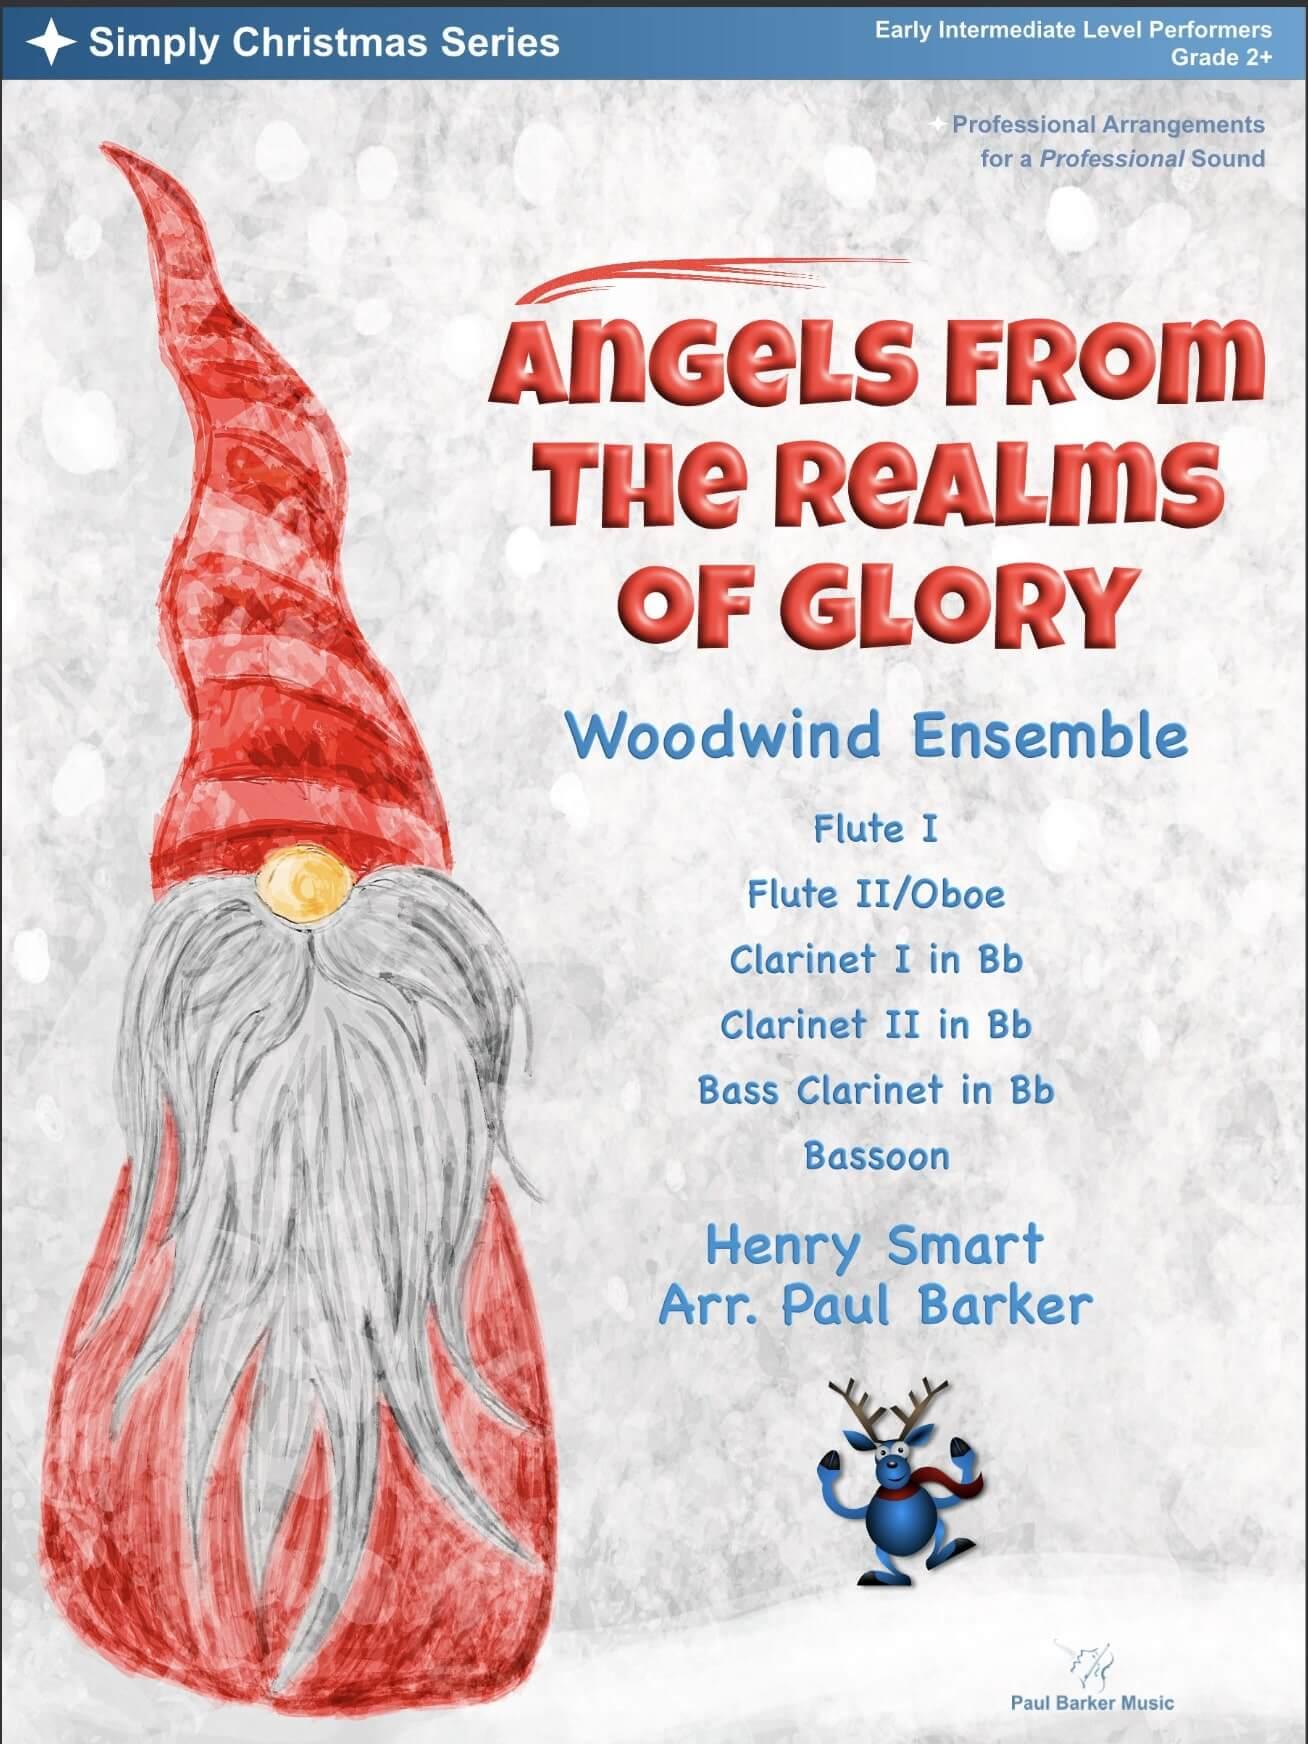 Angels From The Realms Of Glory (Woodwind Ensemble) - Paul Barker Music 